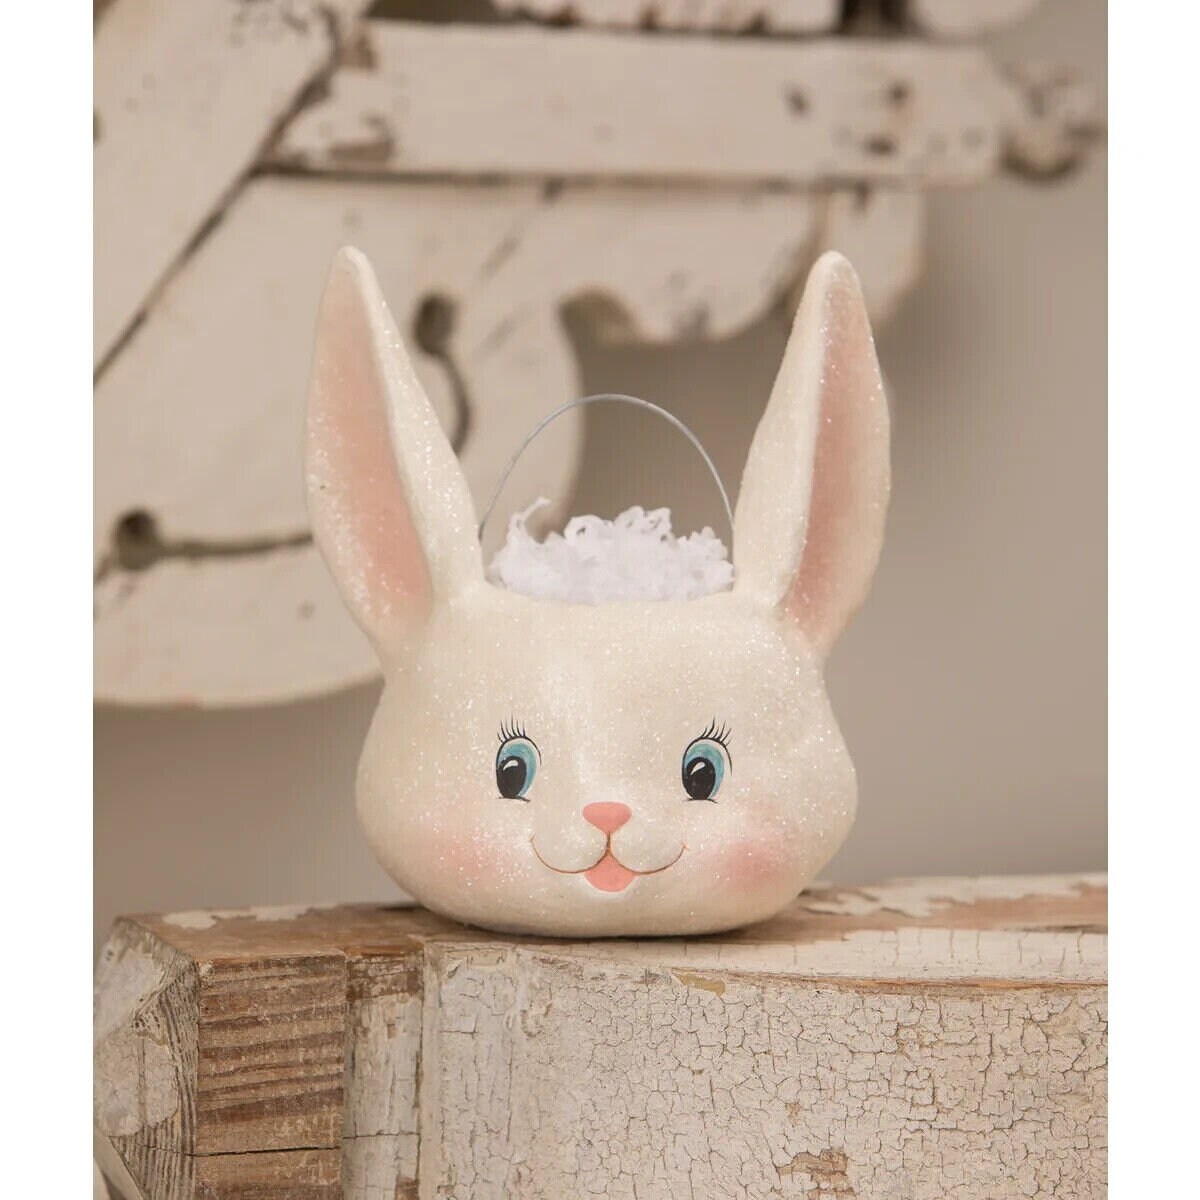 BELUPAI Straw Bunny Peter Rabbit Decor Creative Children Easter Bunny Model  Straw Rabbit With Lean Forward In Clothes Home Decorative